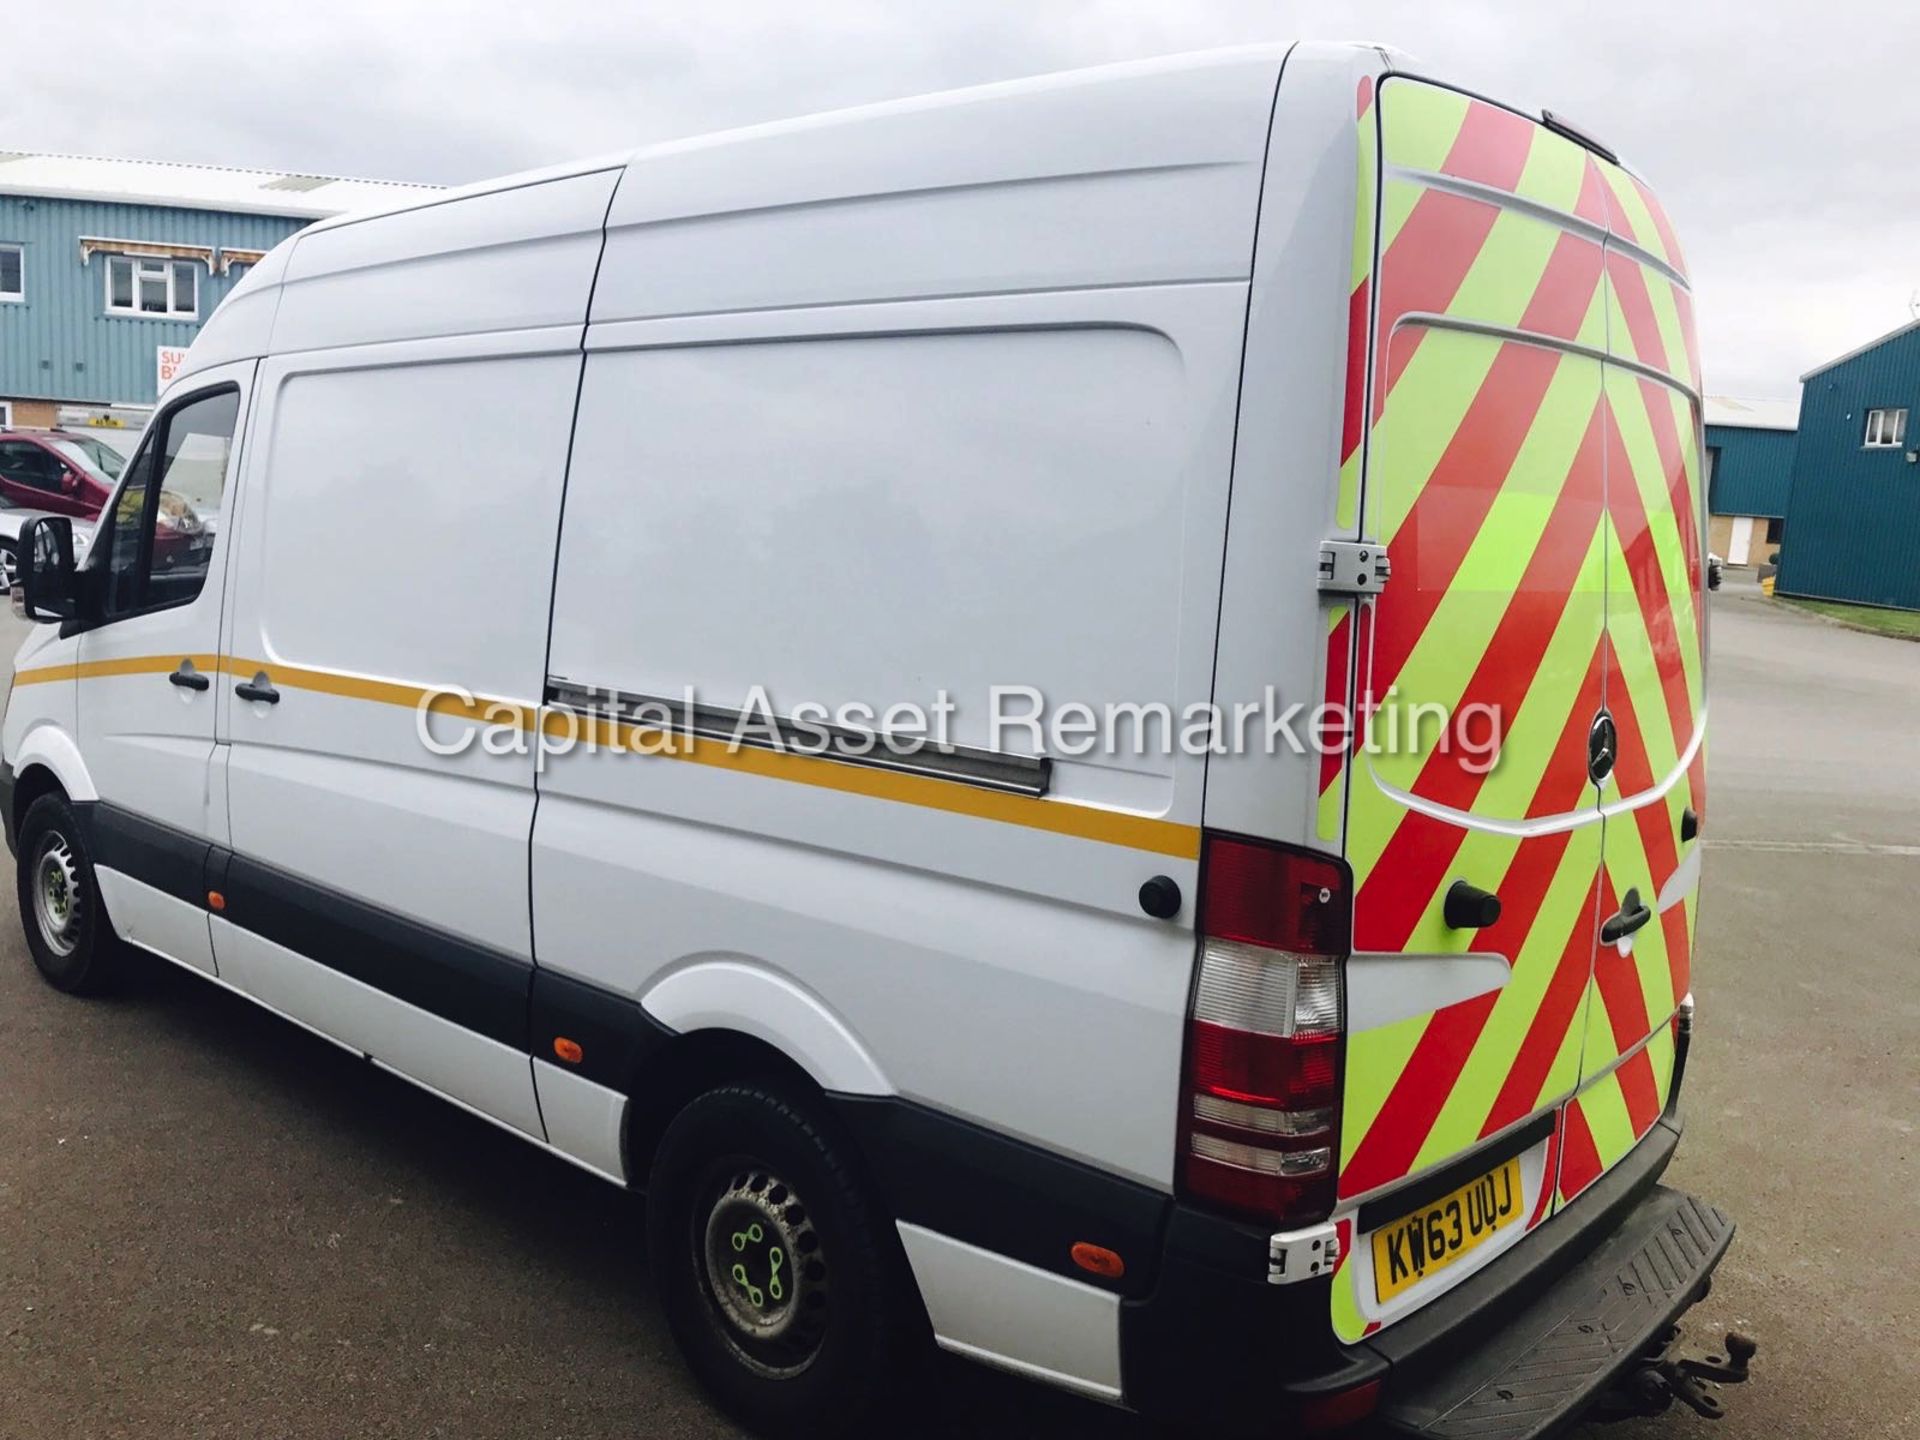 MERCEDES-BENZ SPRINTER 313 CDI 'MWB HI-ROOF' (2014) '130 BHP - 6 SPEED' ( 1 OWNER - FULL HISTORY) - Image 4 of 13